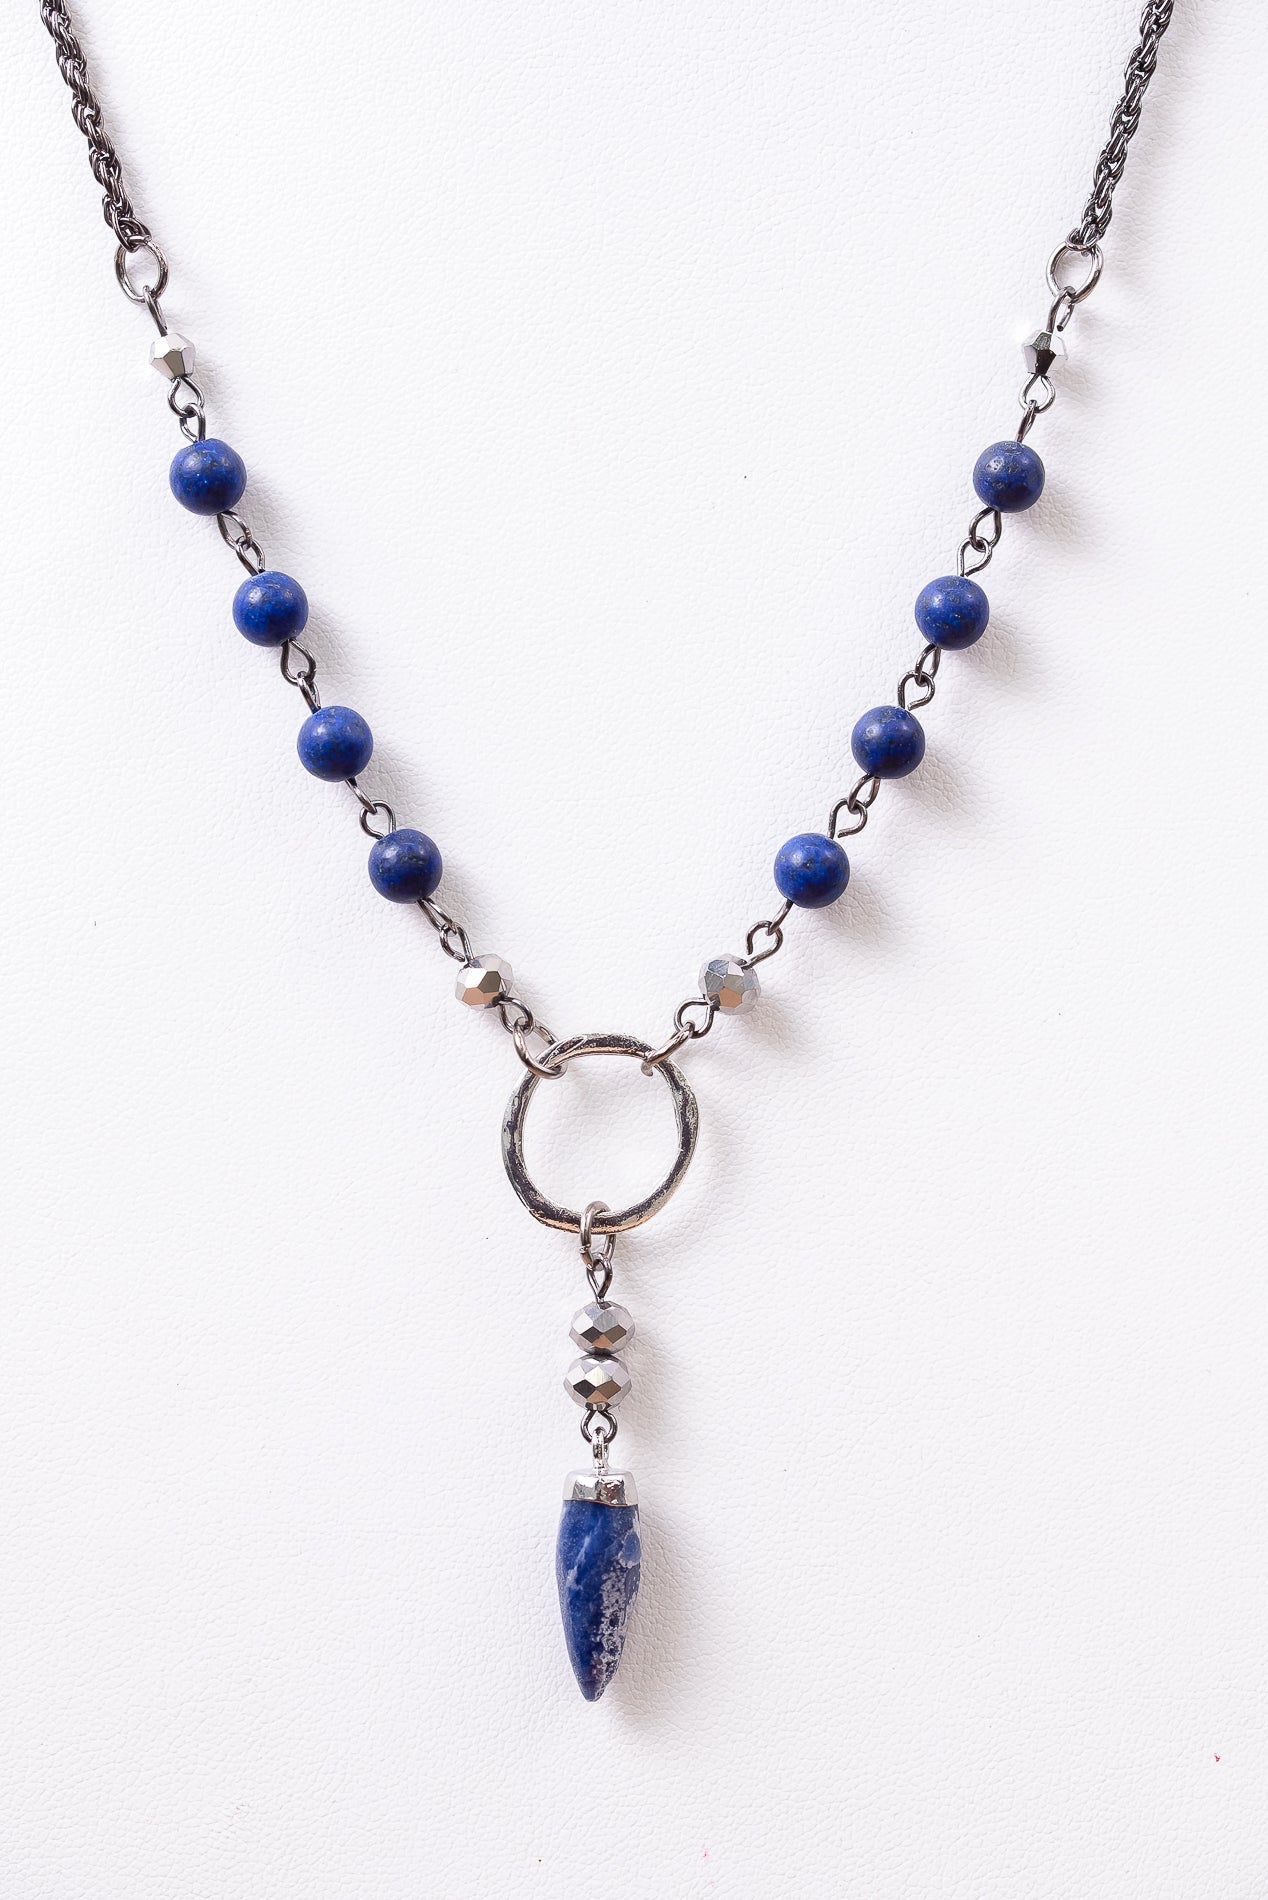 Silver/Royal Blue/Beaded/Open Circle/Drop Charm Necklace - NEK4034SI